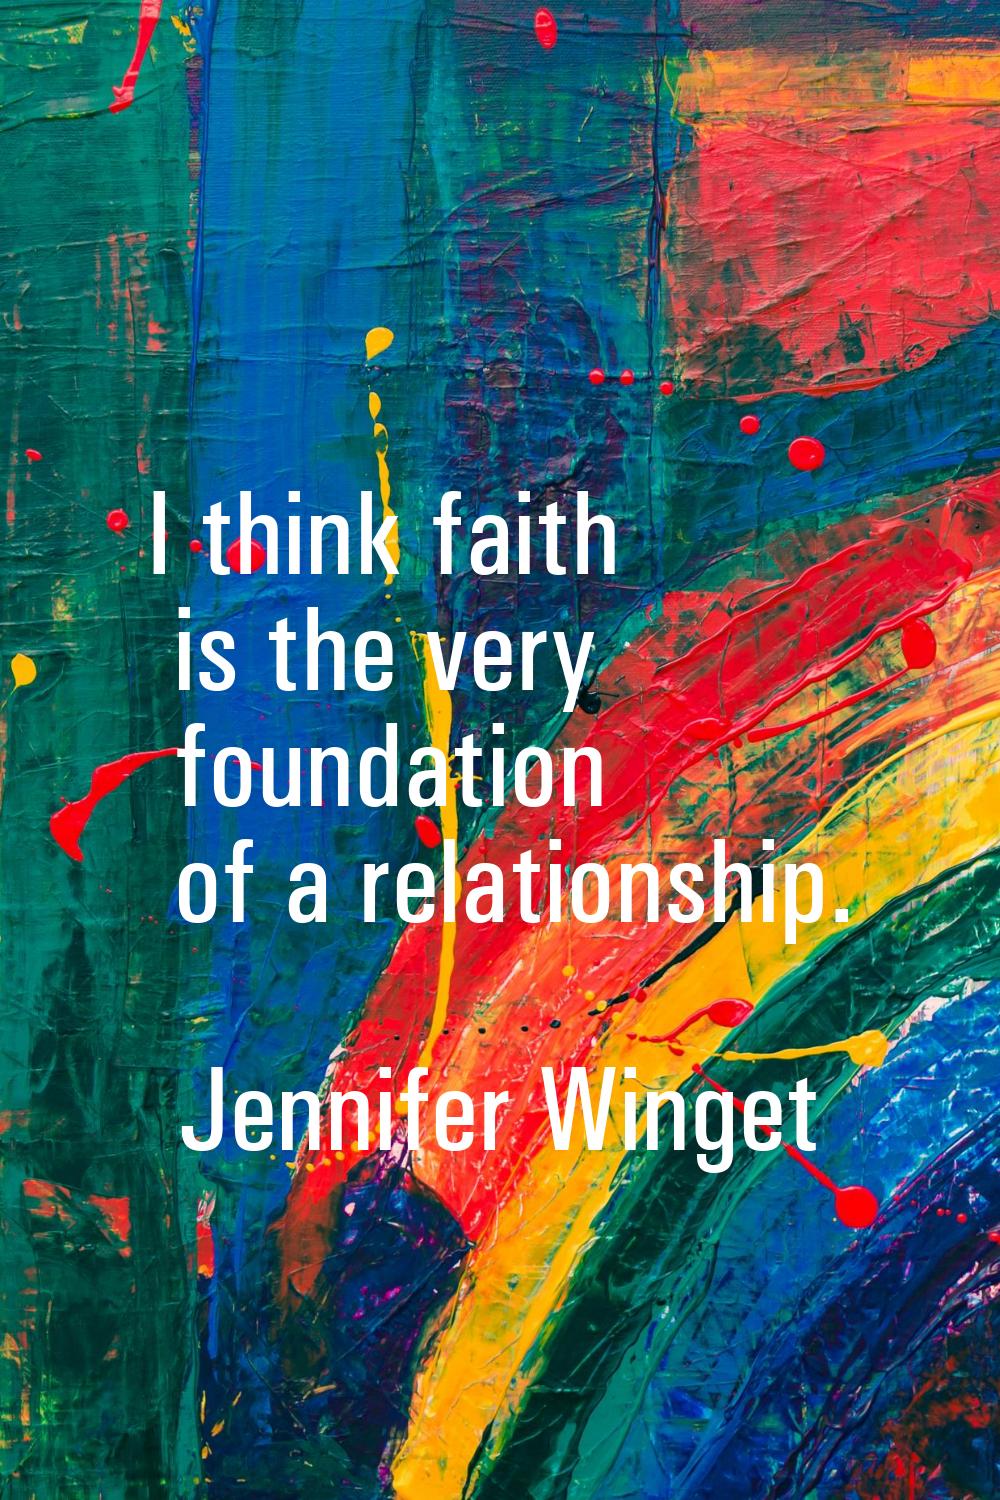 I think faith is the very foundation of a relationship.